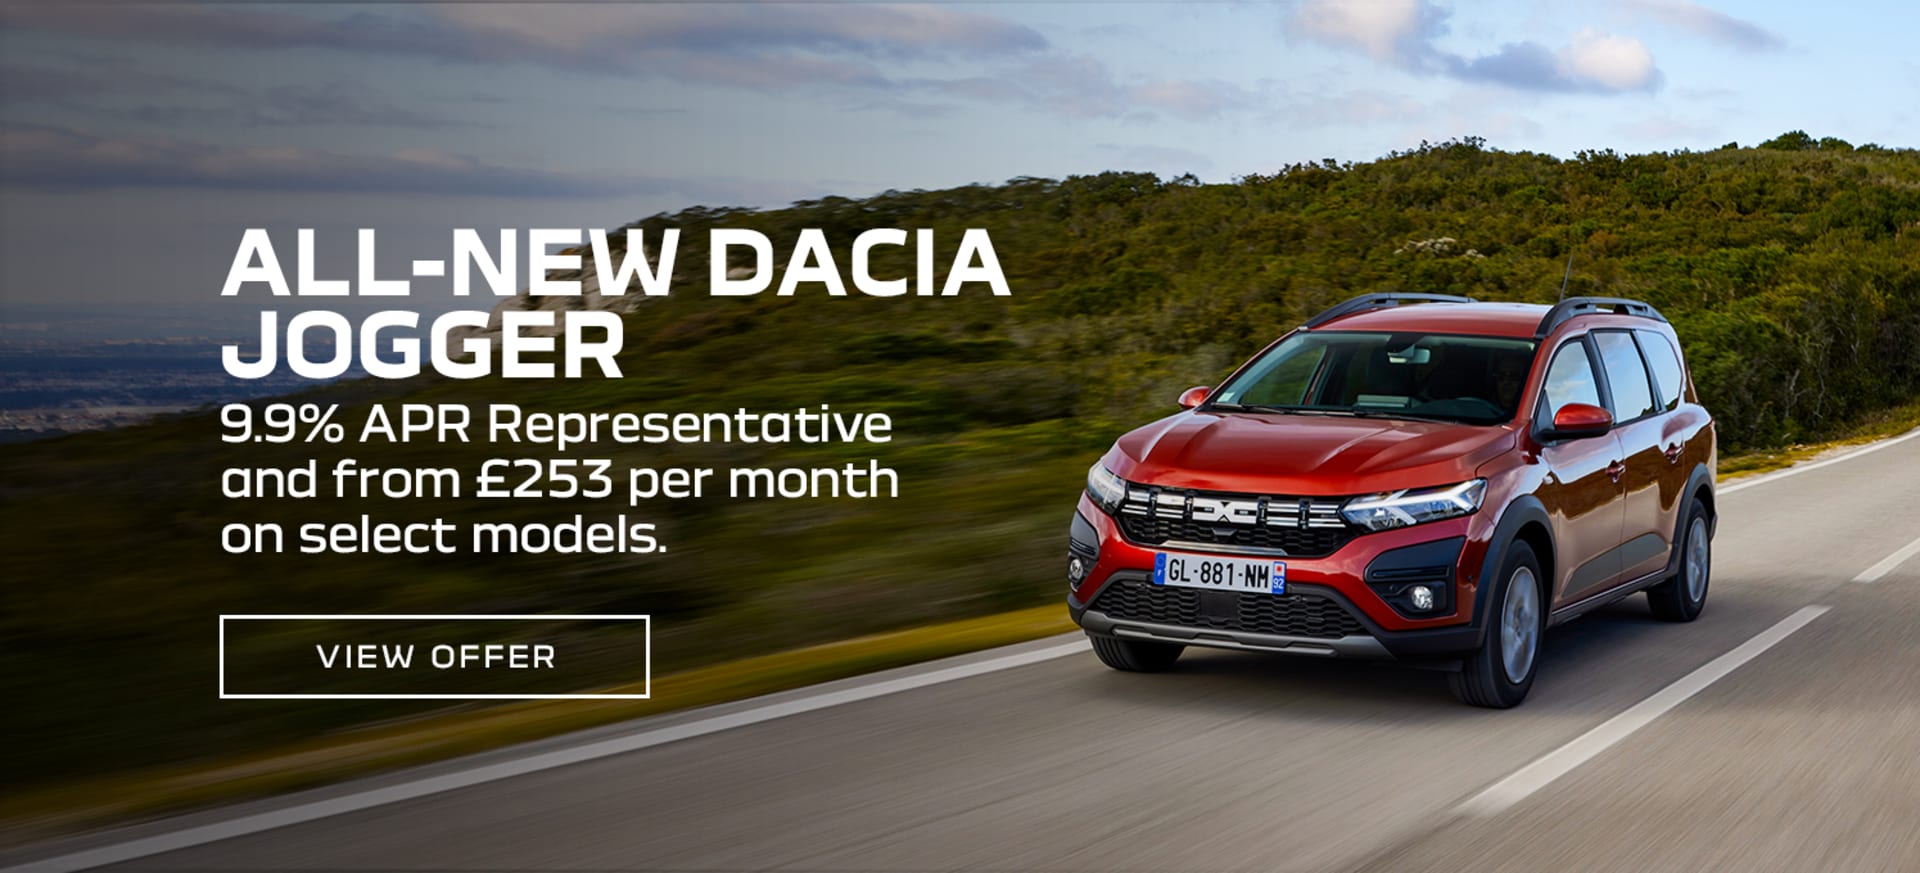 All New Dacia Jogger from £235 per month 9.9% APR